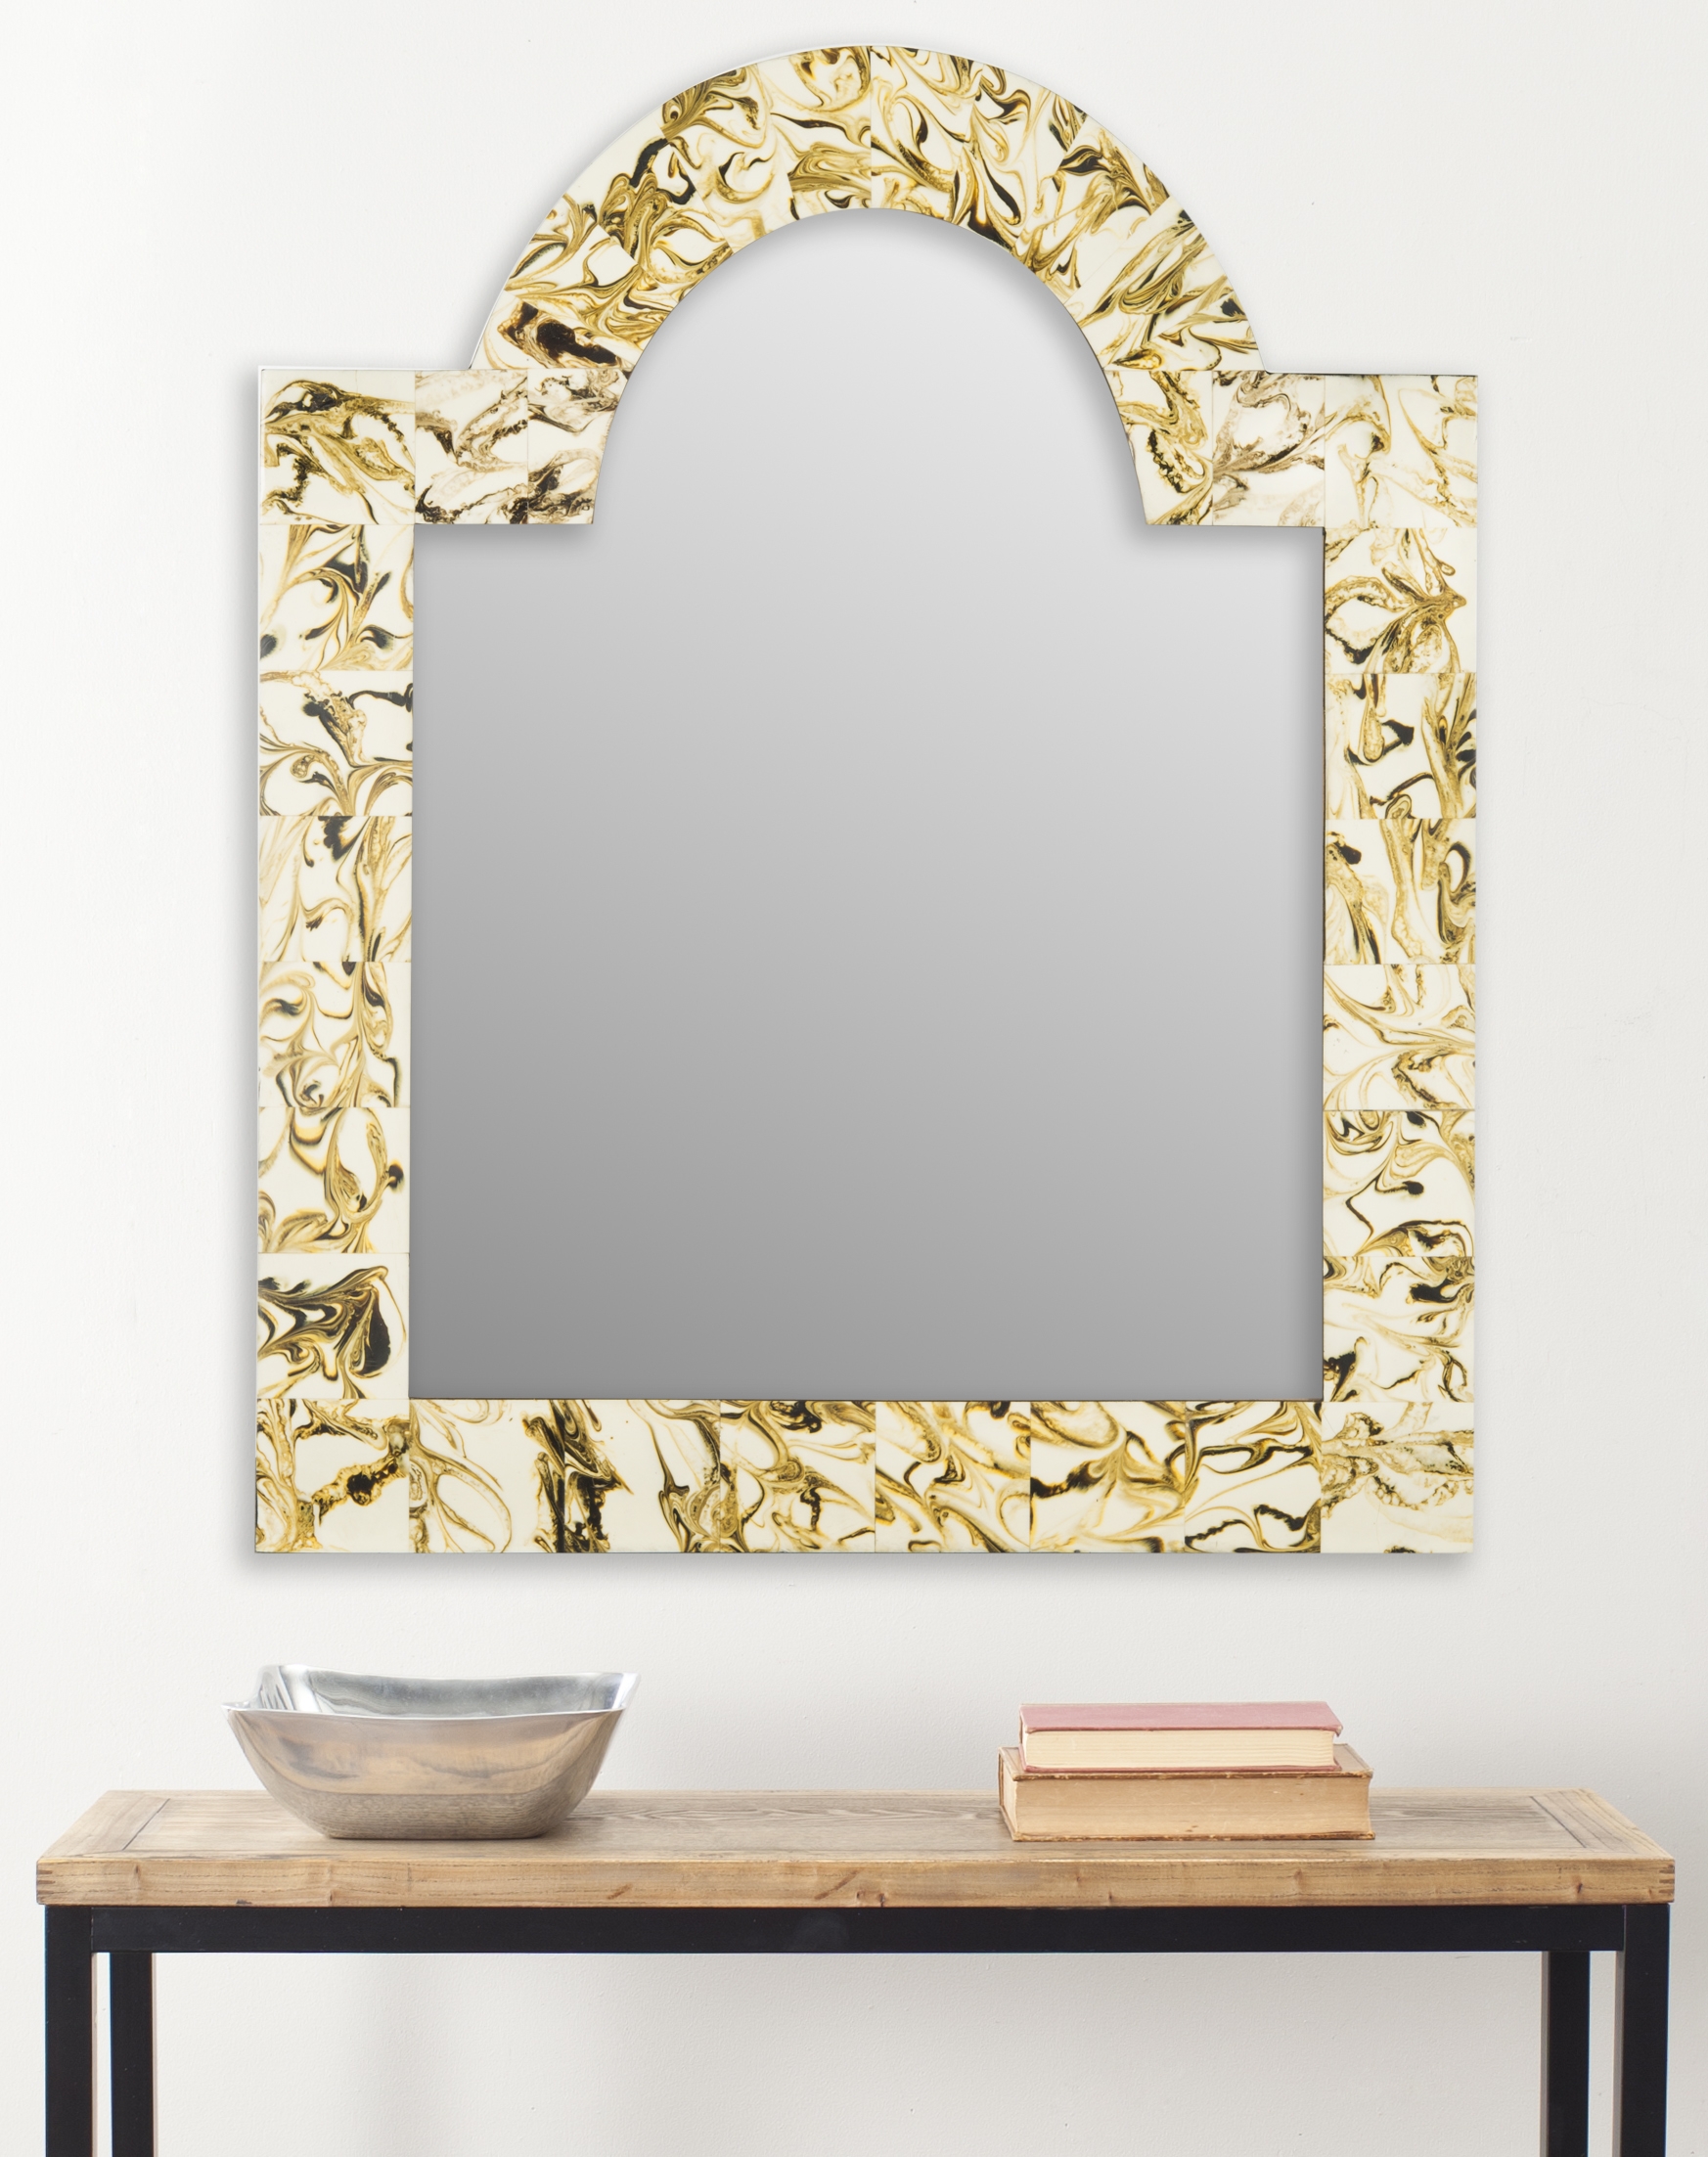 Antibes Arched Mirror - Multi - Arlo Home - Image 2